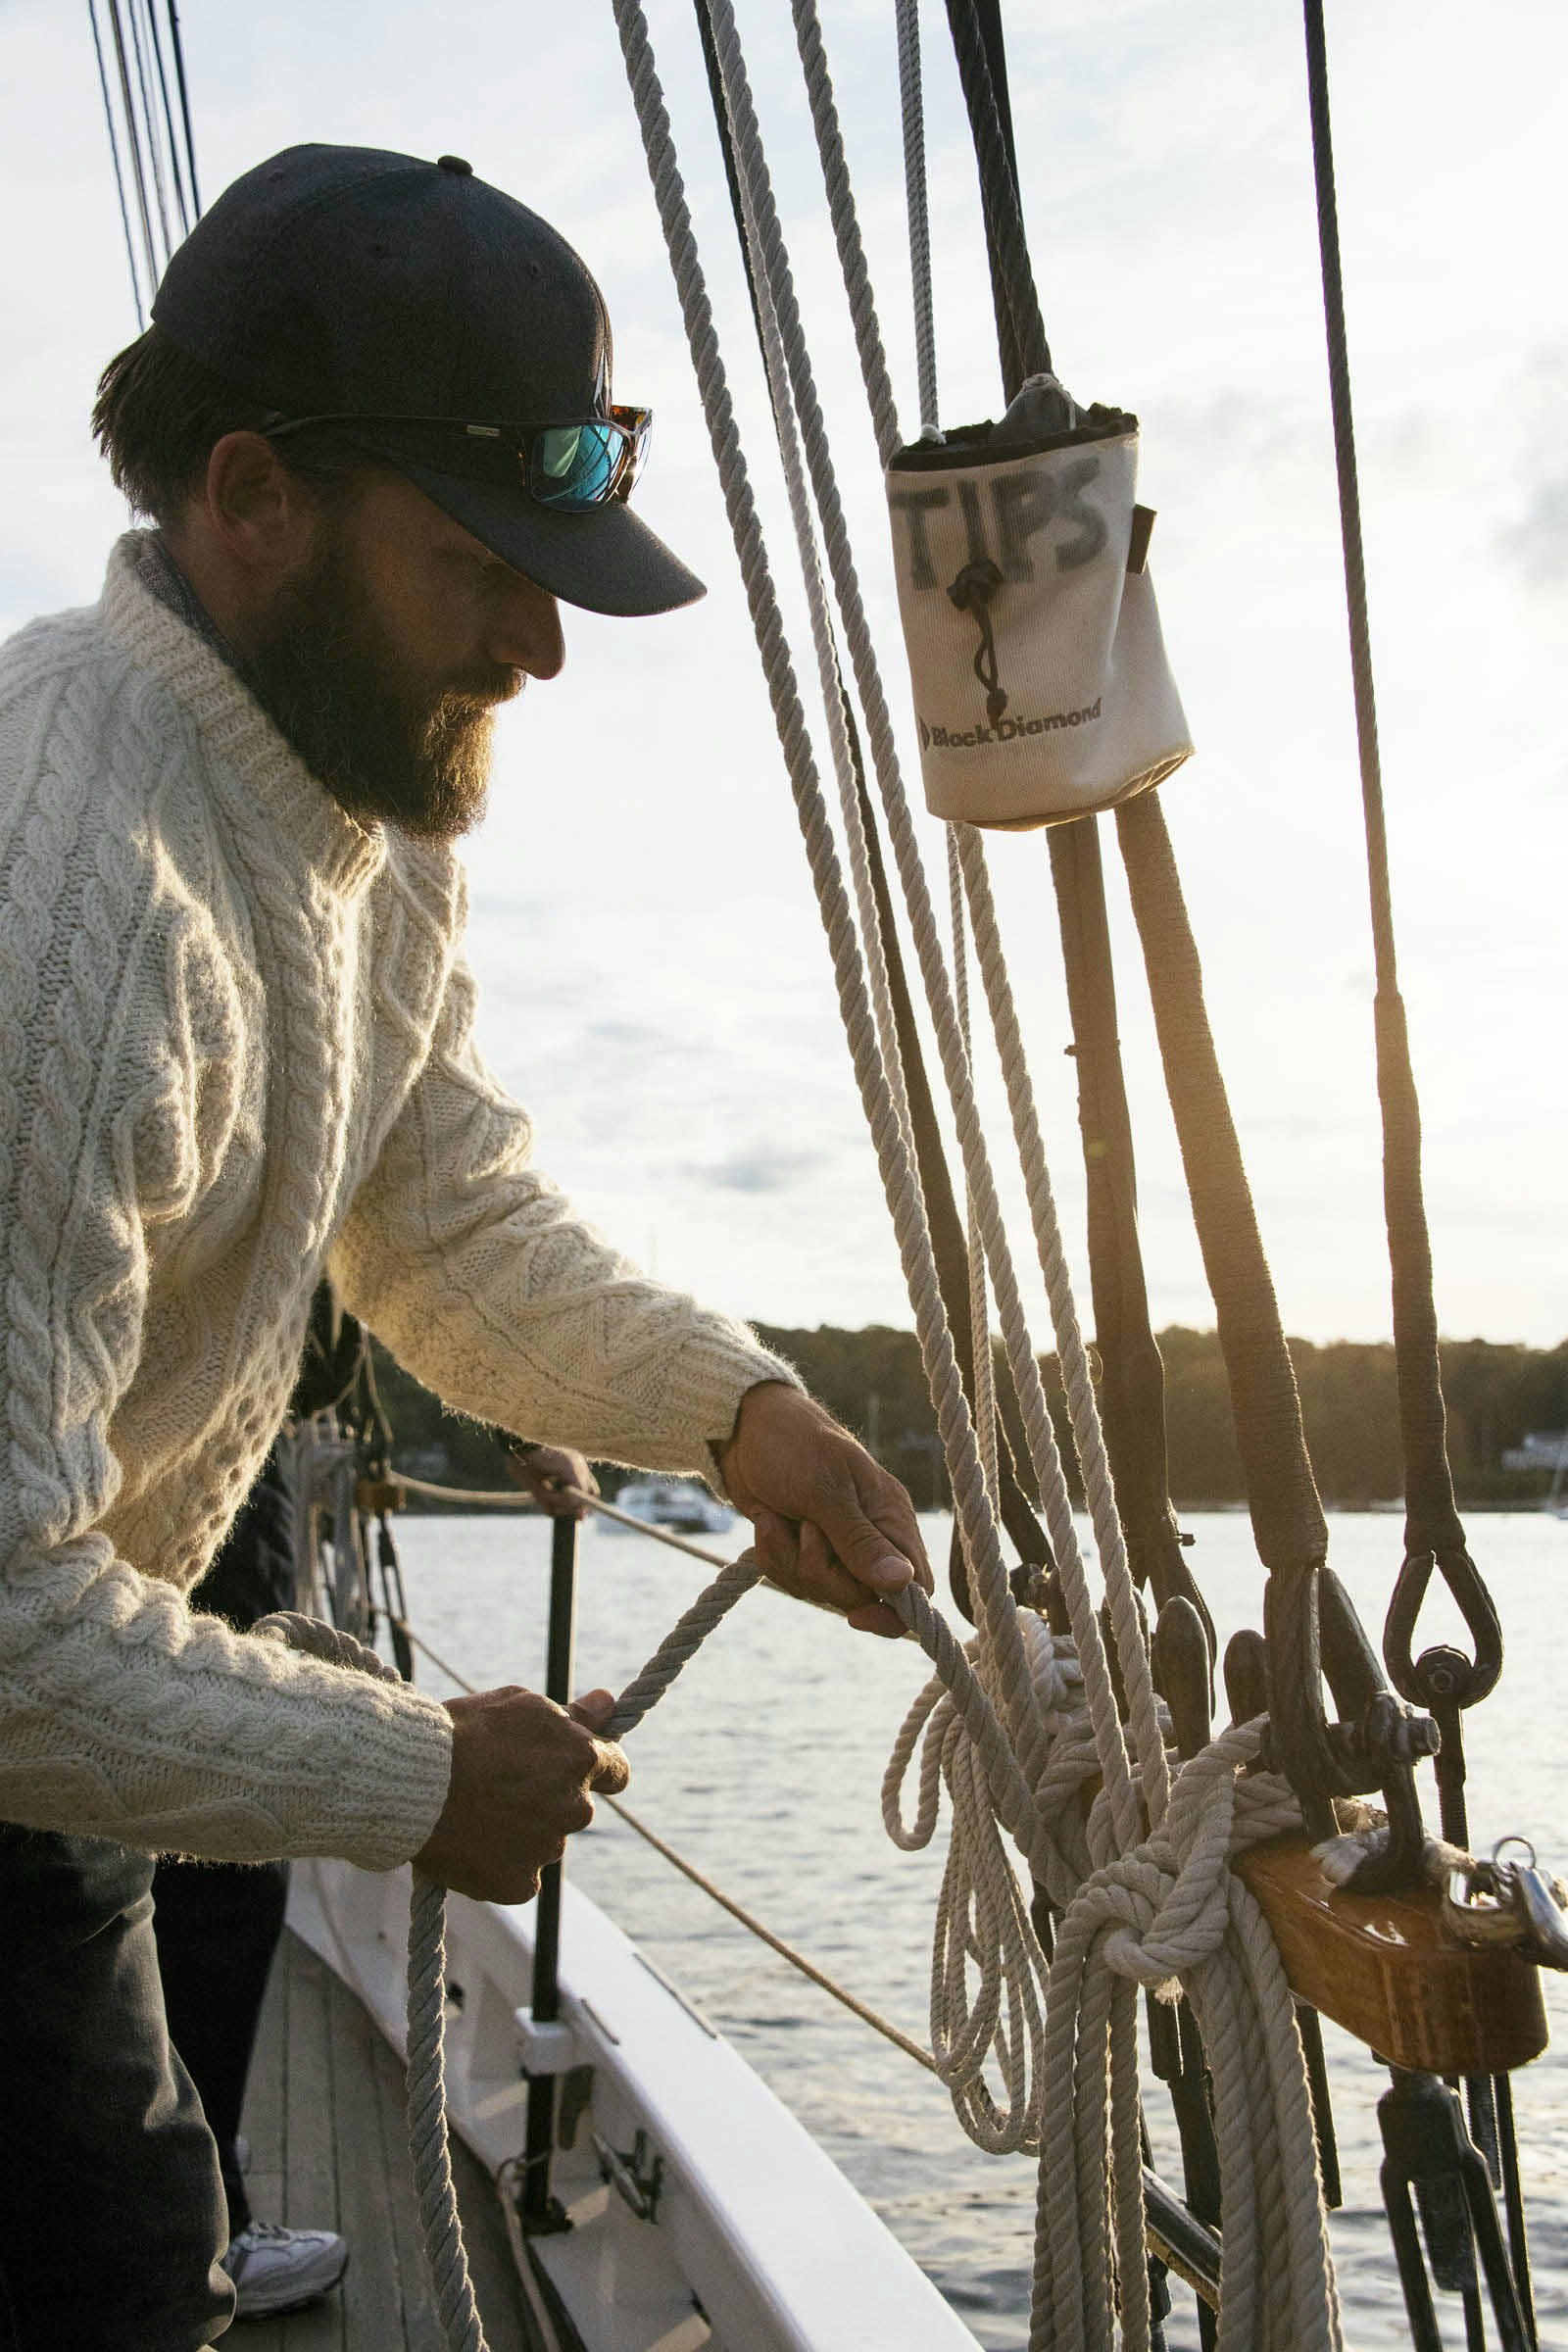 Laird Kopp attends to the rigging on the Surprise